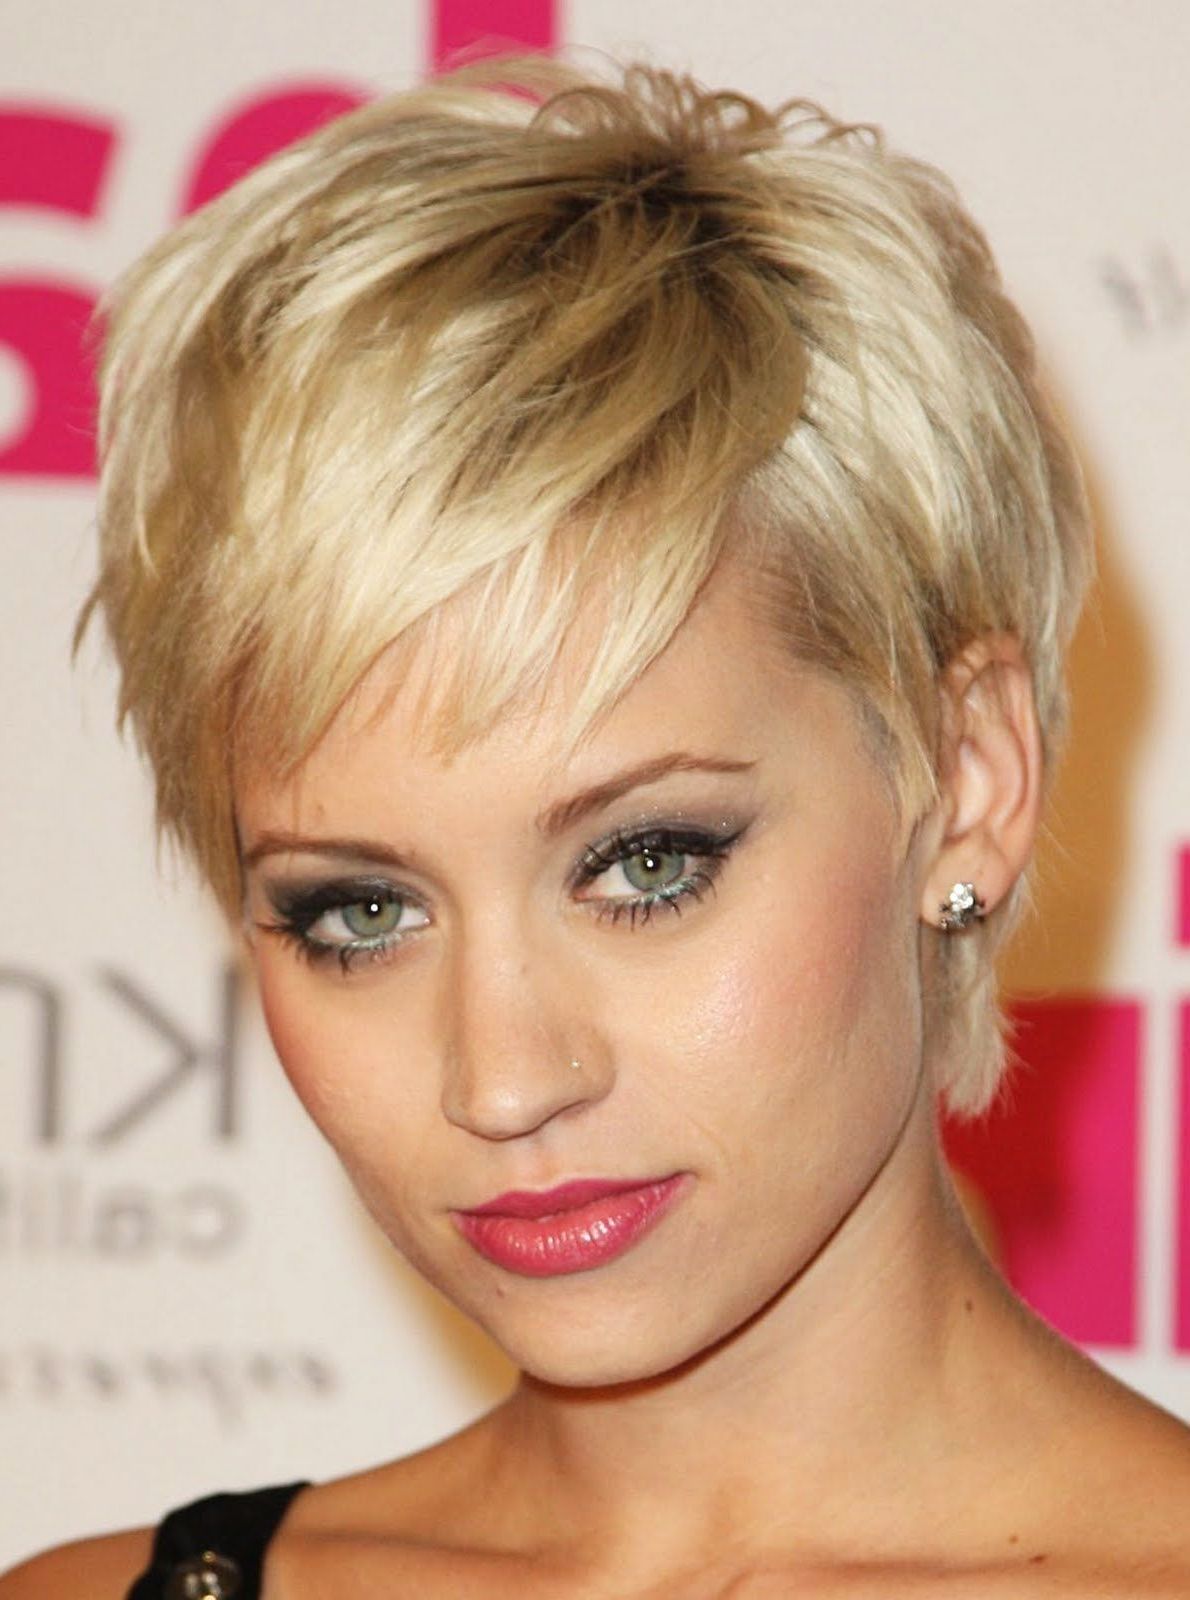 Short Hairstyles For Oval Faces | Hair Cut | Pinterest | Short Hair With Regard To Short Hairstyles For An Oval Face (View 2 of 25)